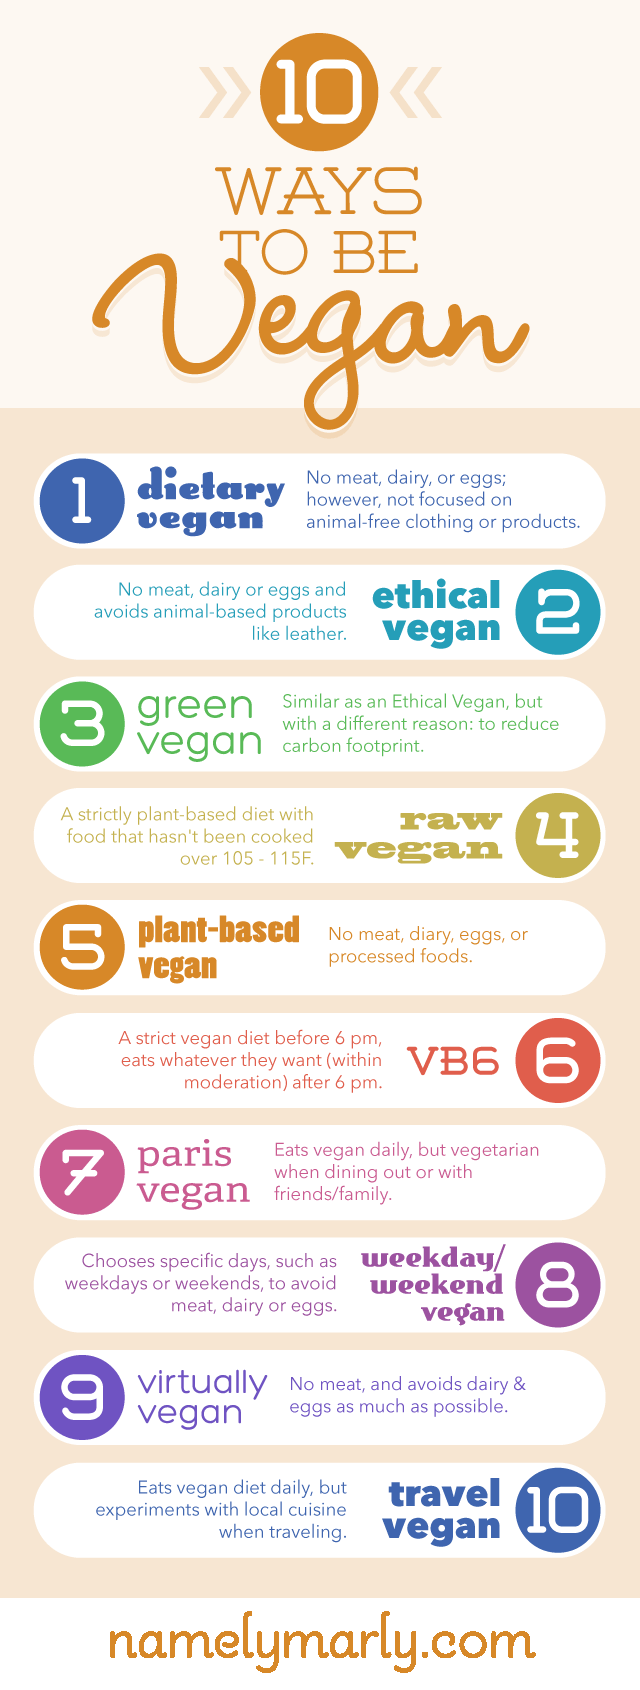 Being vegan is more than just one restrictive way of living. If you think being 100% vegan (if that re